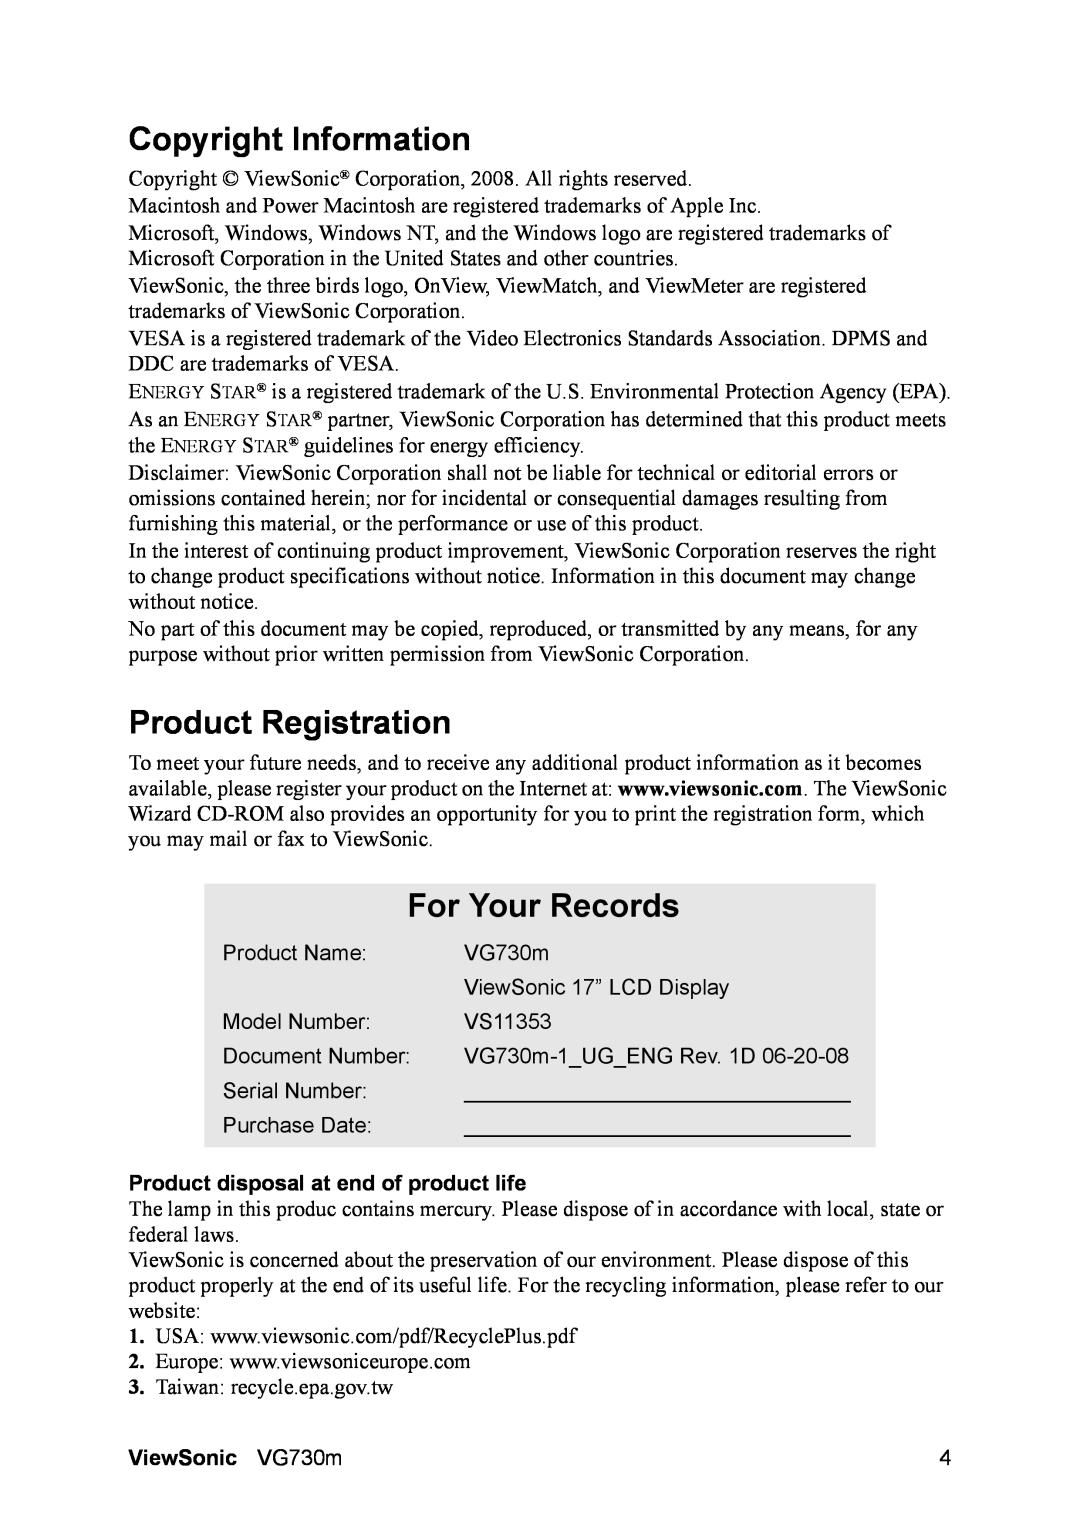 ViewSonic VS11353 Copyright Information, Product Registration, For Your Records, Product disposal at end of product life 